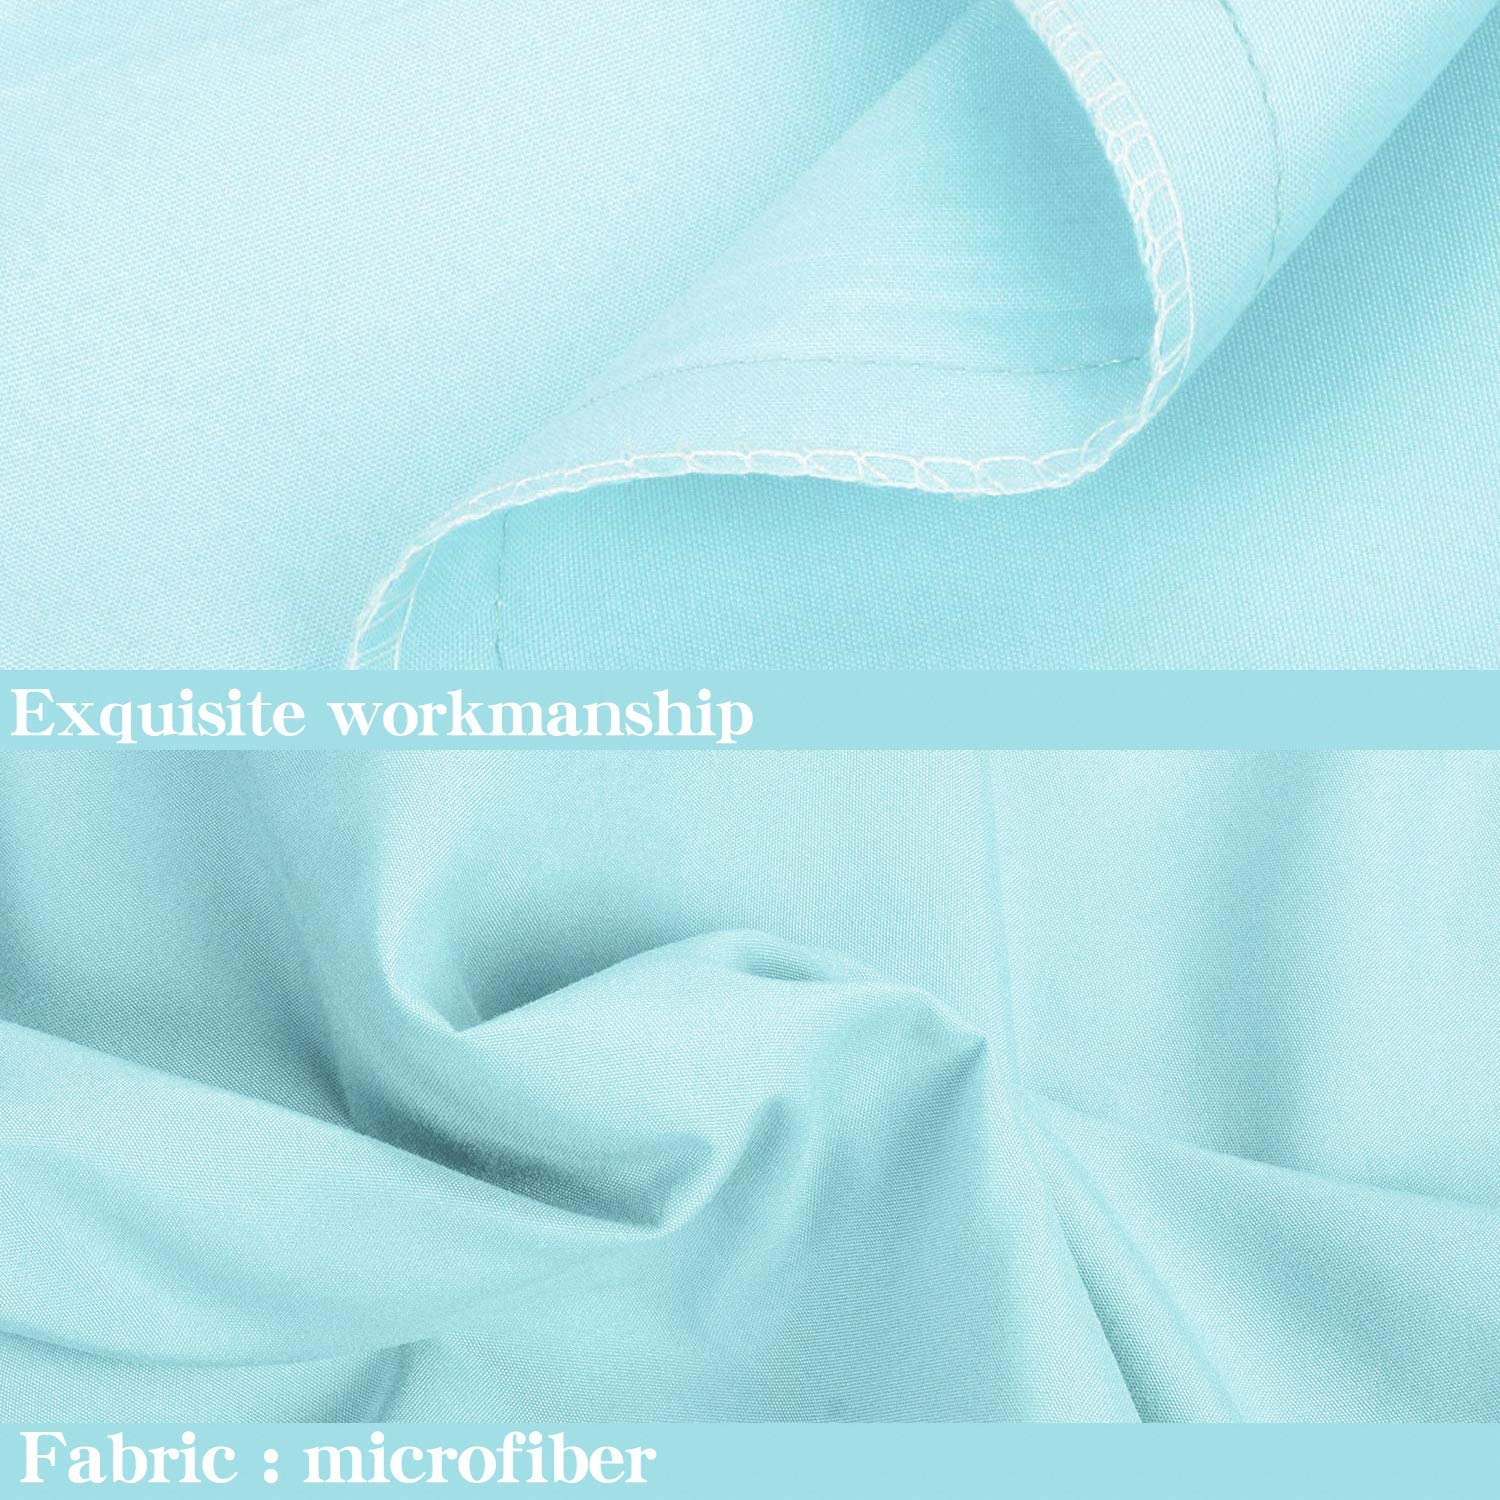  100% Brushed Microfiber Standard Pillow Cases for Kids Set of 2, Super Soft and Cozy, Wrinkle, Fade, Stain Resistant with Envelope Closure Pillowcases, 20X26 Inches, Aqua